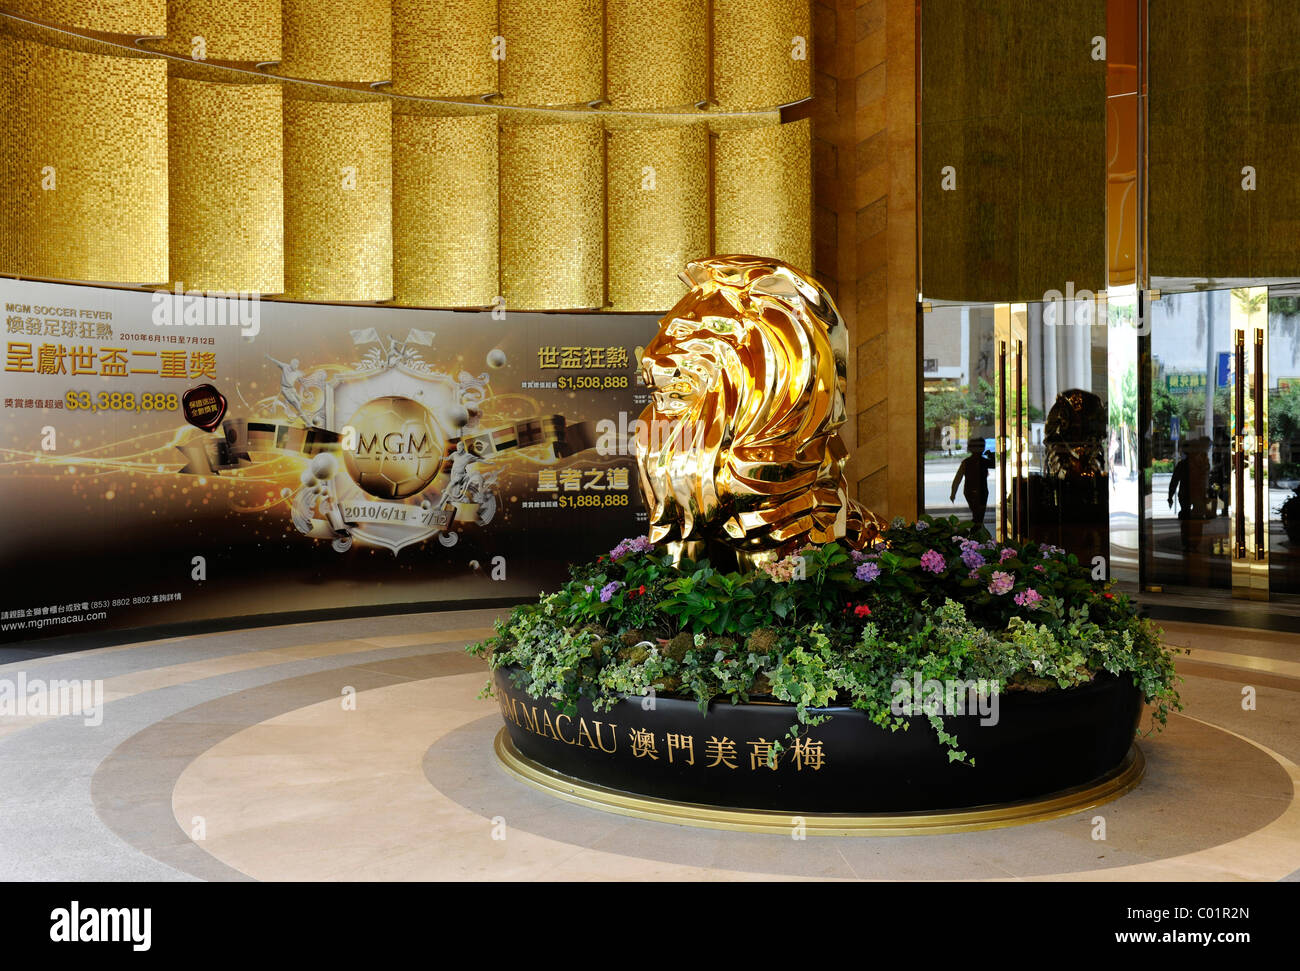 Golden Lion at the entrance to the MGM in Macao, China, Asia Stock Photo